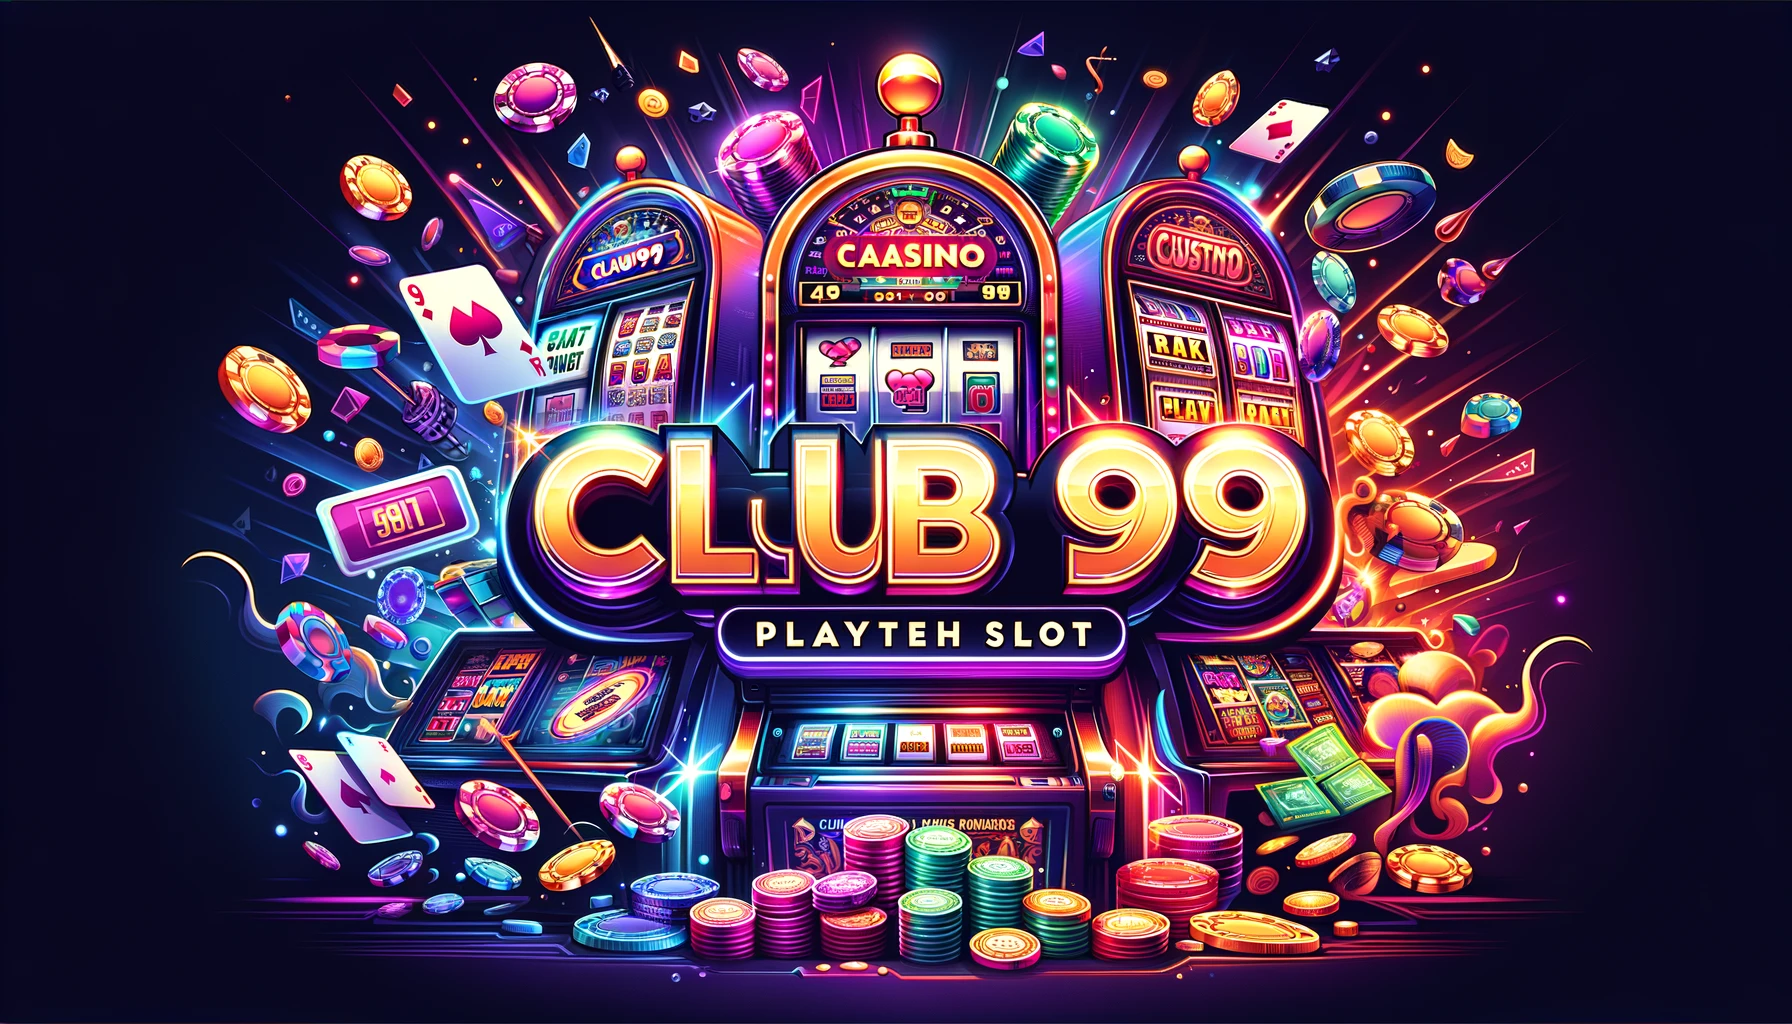 Club99 Playtech Slot: Experience the Best in Online Slot Gaming